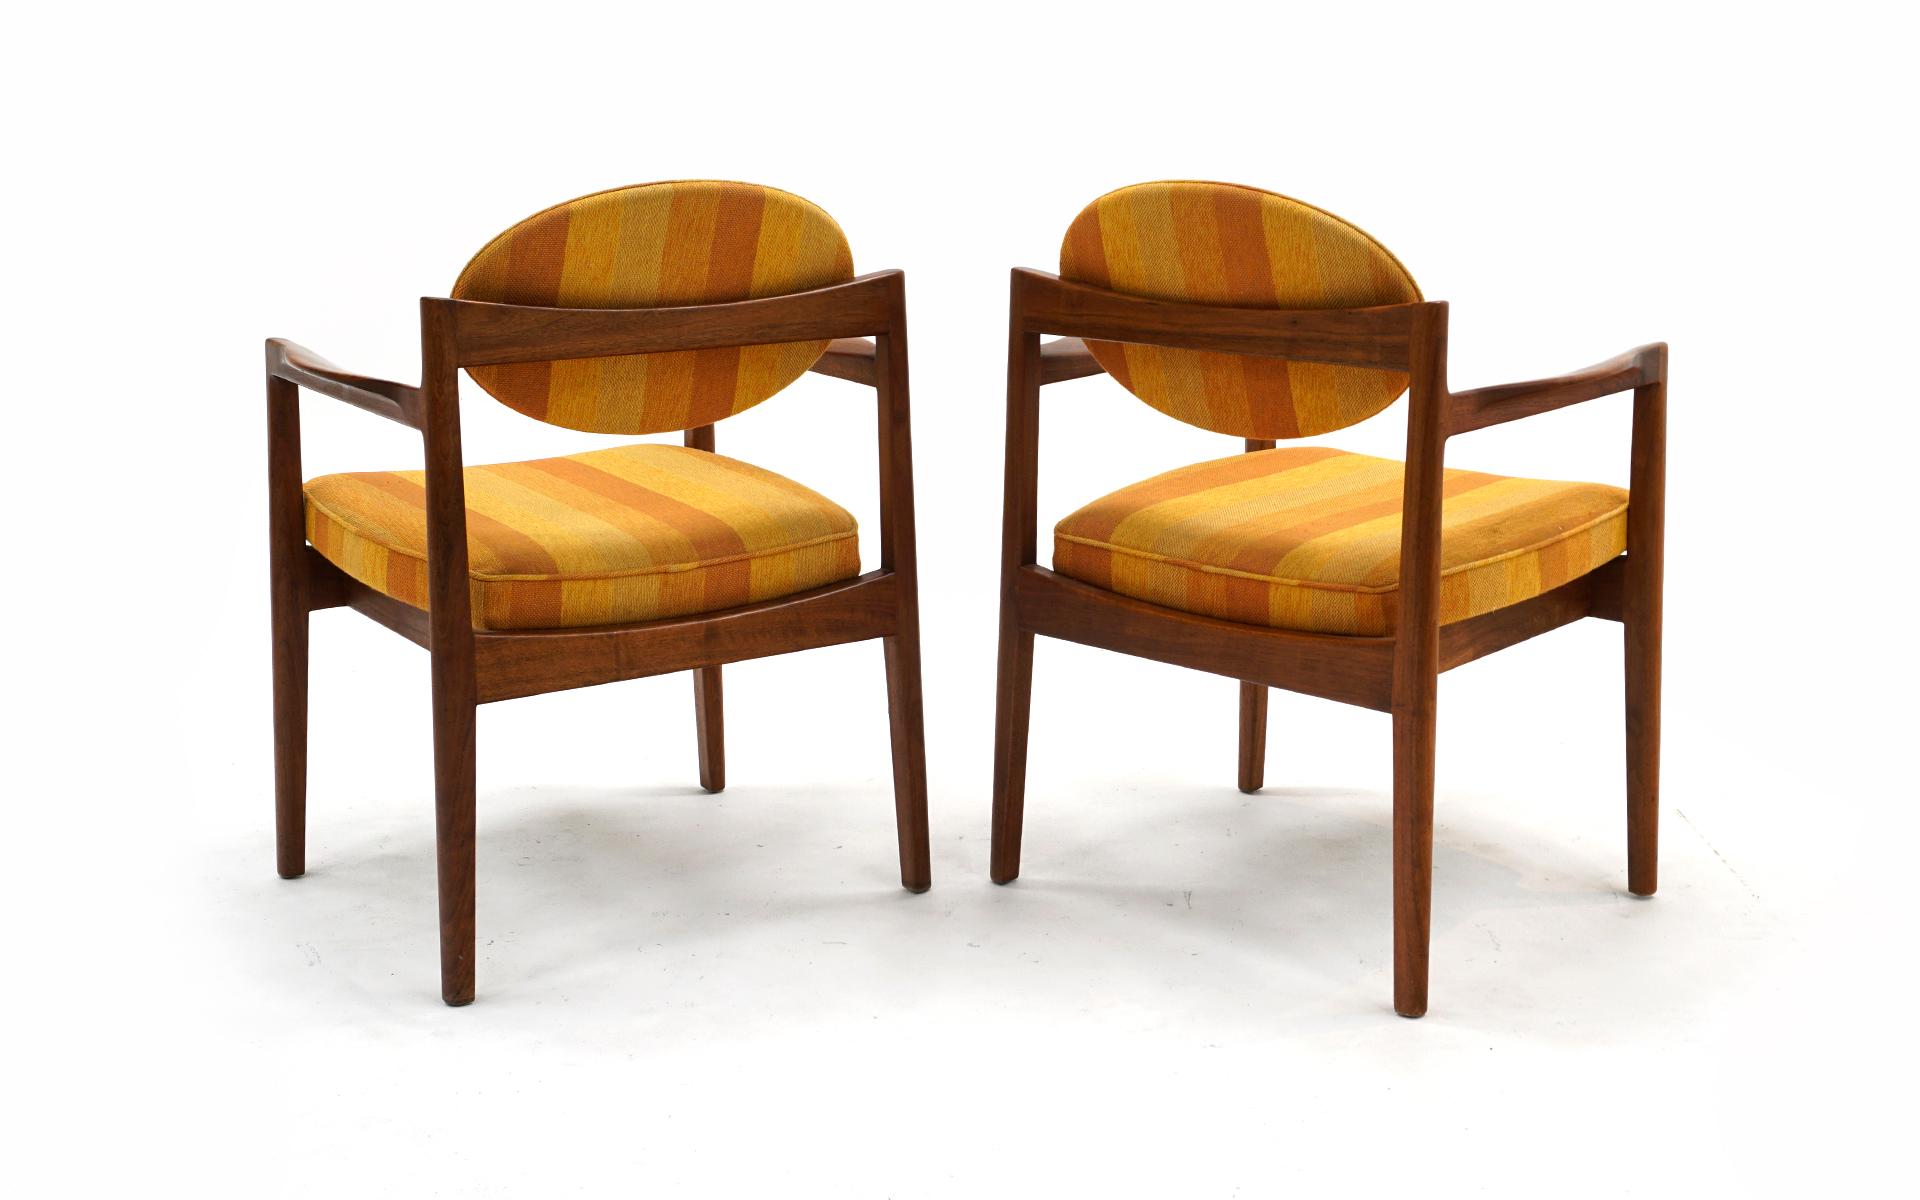 Mid-20th Century Jens Risom Dining Chairs, Set of Four, Two Arm and Two Side Chairs, Walnut